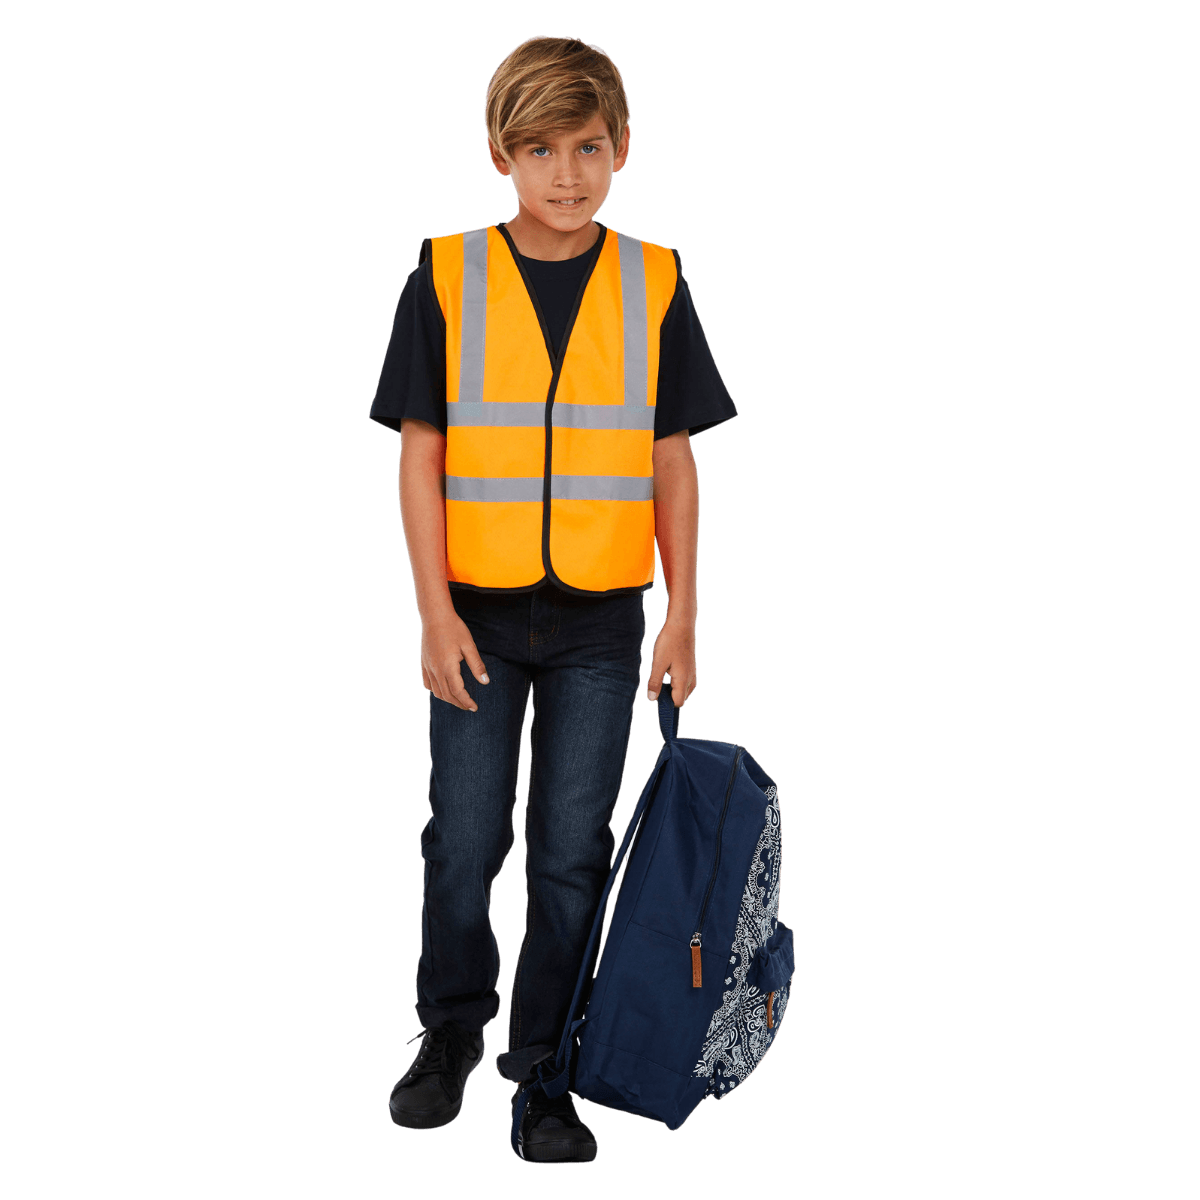 Young school  box wearing a high visibility vest and carrying a school bag